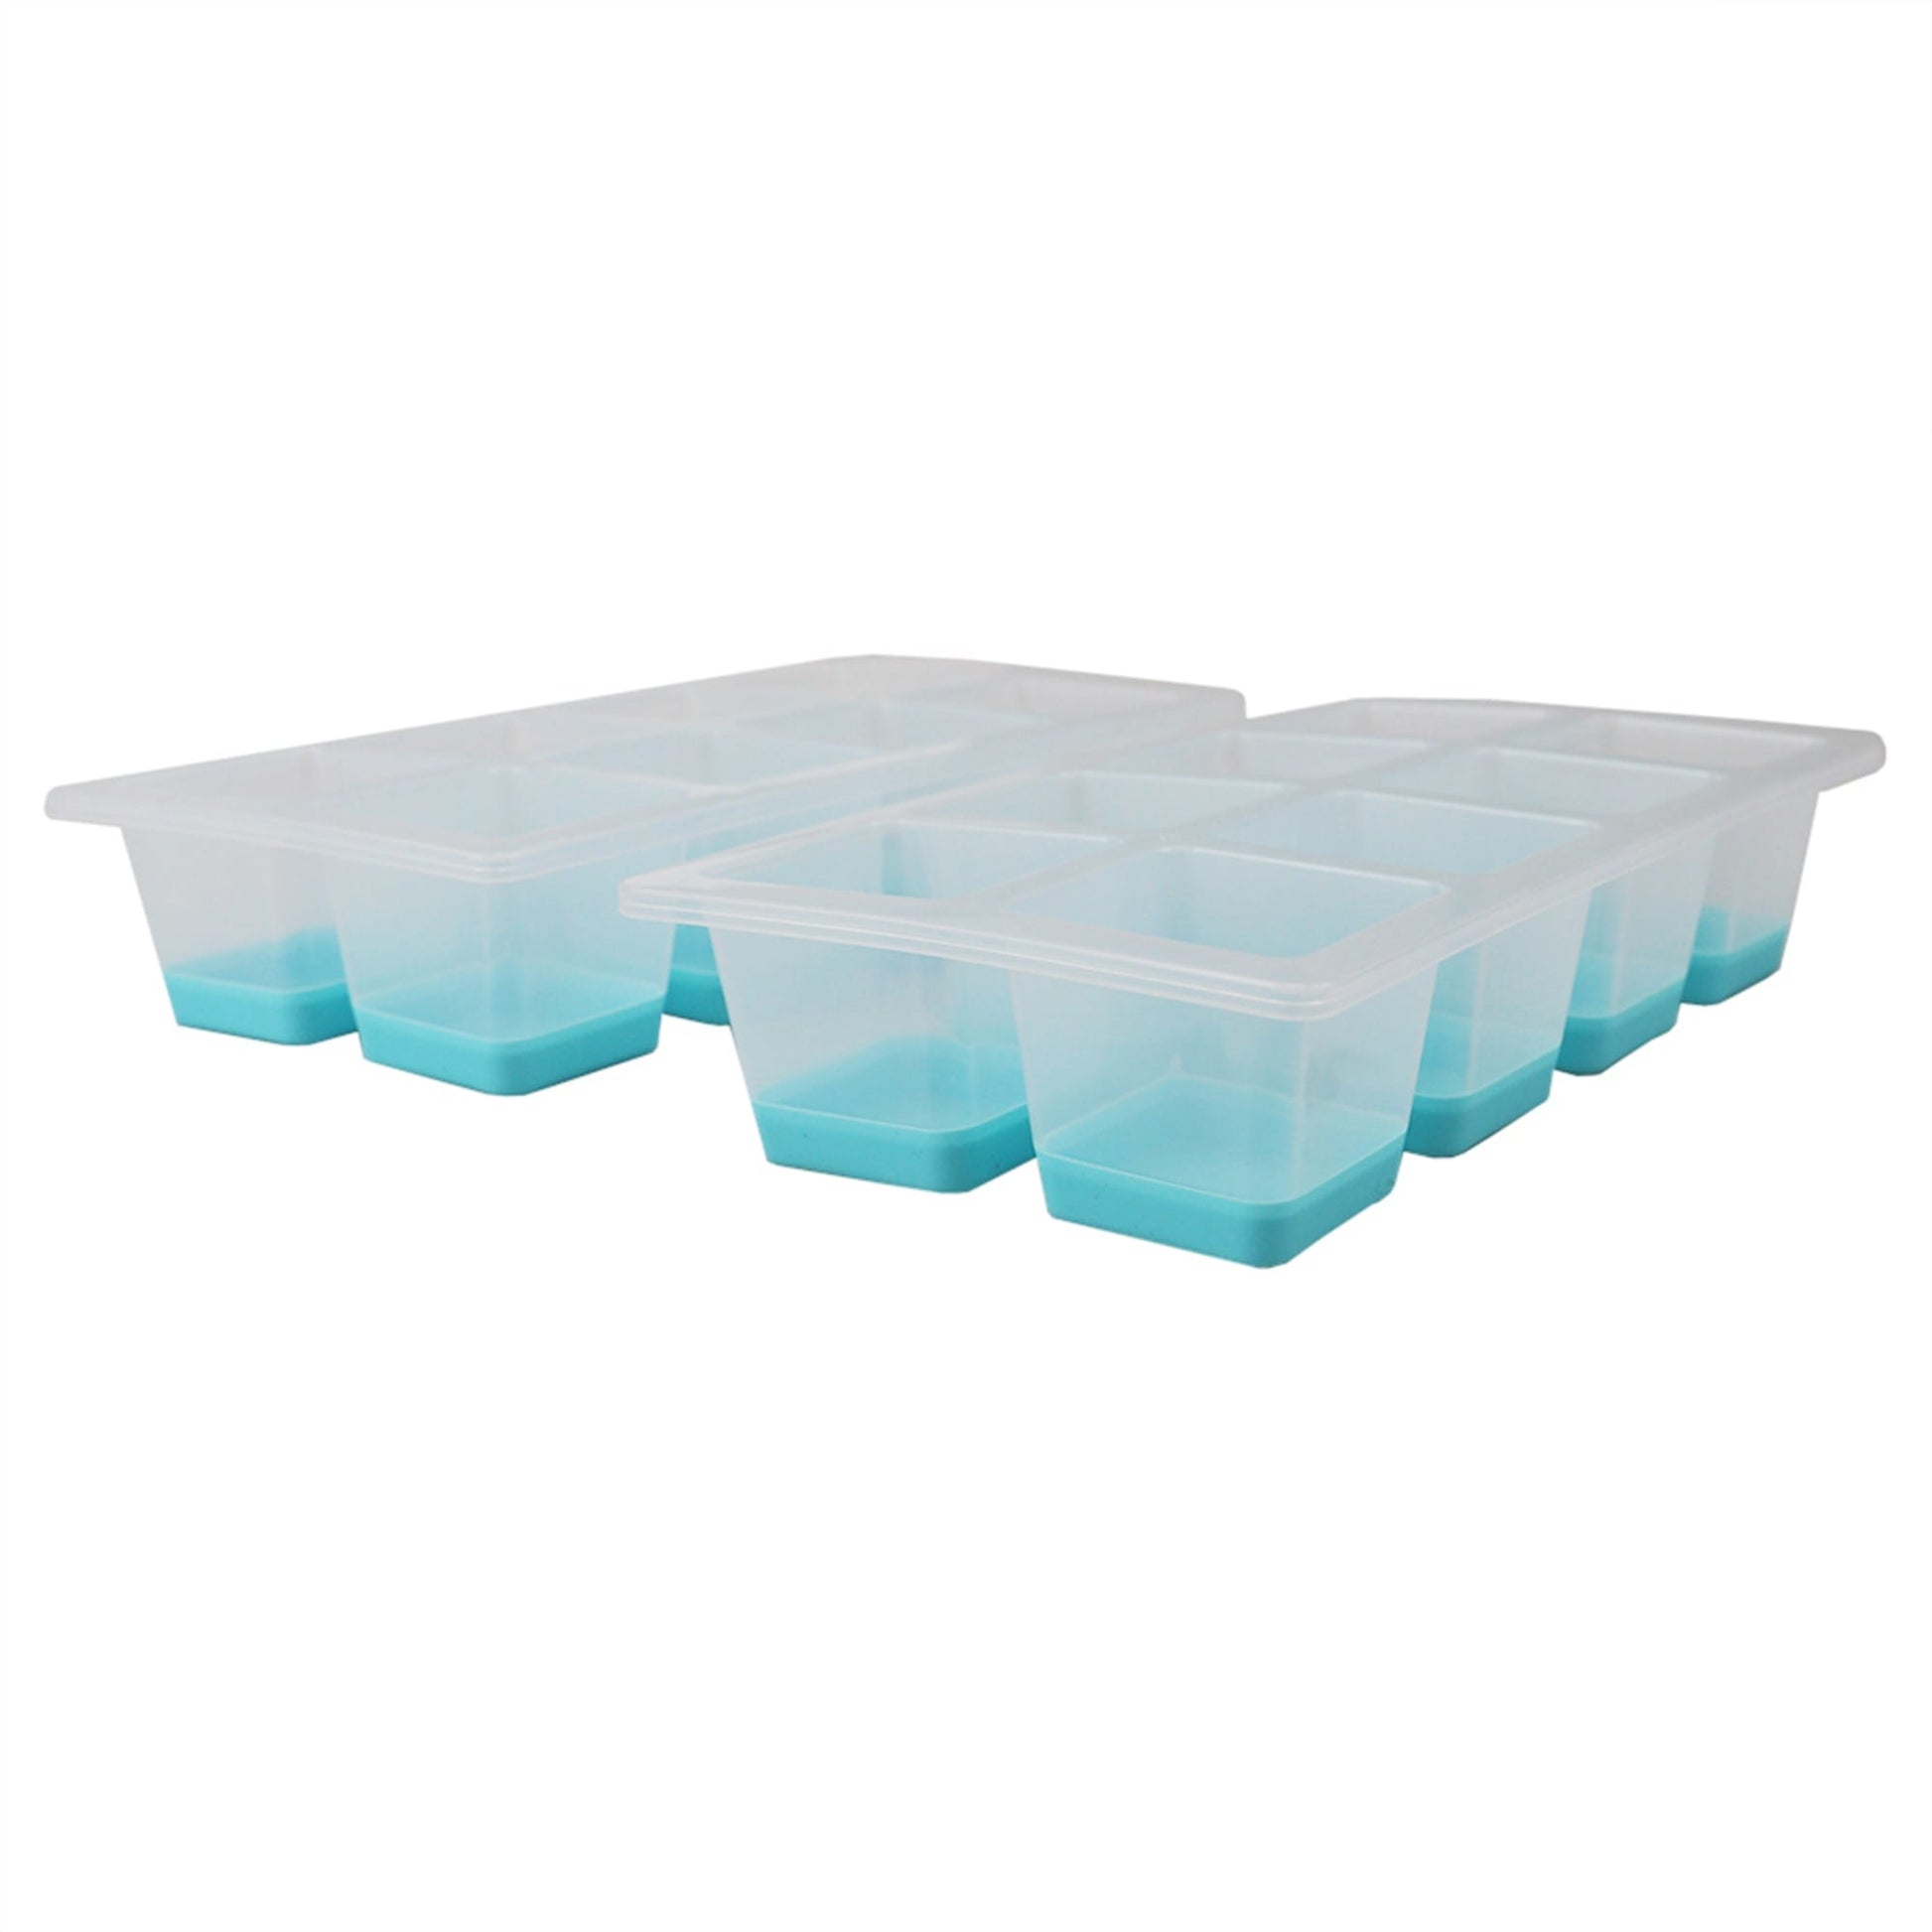 Home Basics Ultra-Slim Plastic Pop-Out Ice Cube Tray, (Pack of 2), Blue, KITCHEN ORGANIZATION